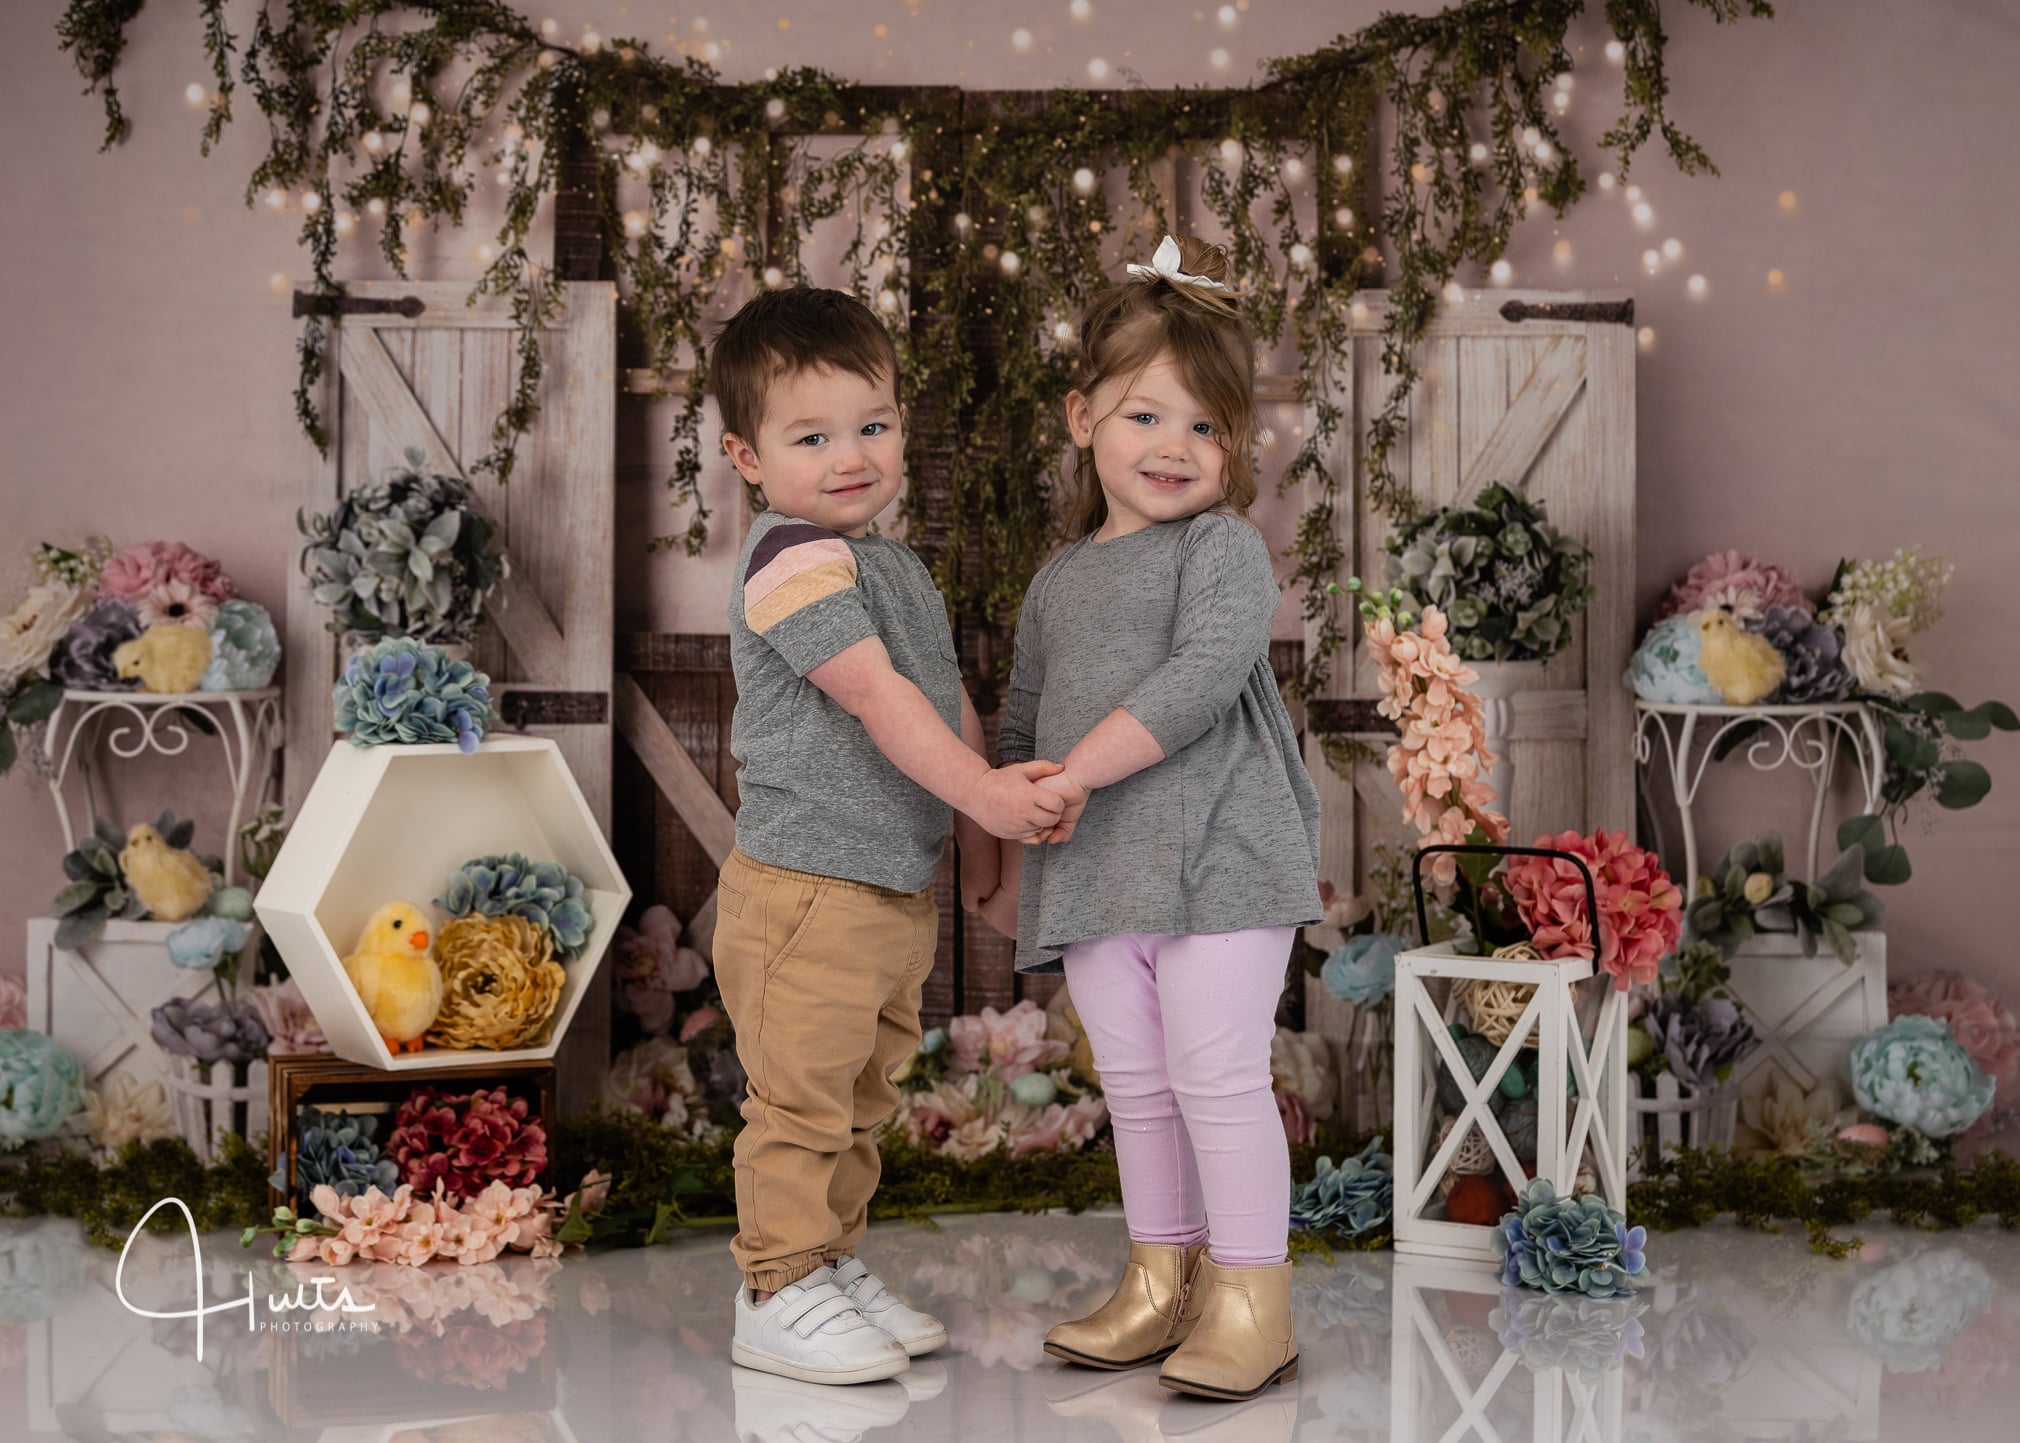 Kate Spring Floral Chicks Backdrop Designed by Mandy Ringe Photography (only ship to Canada)